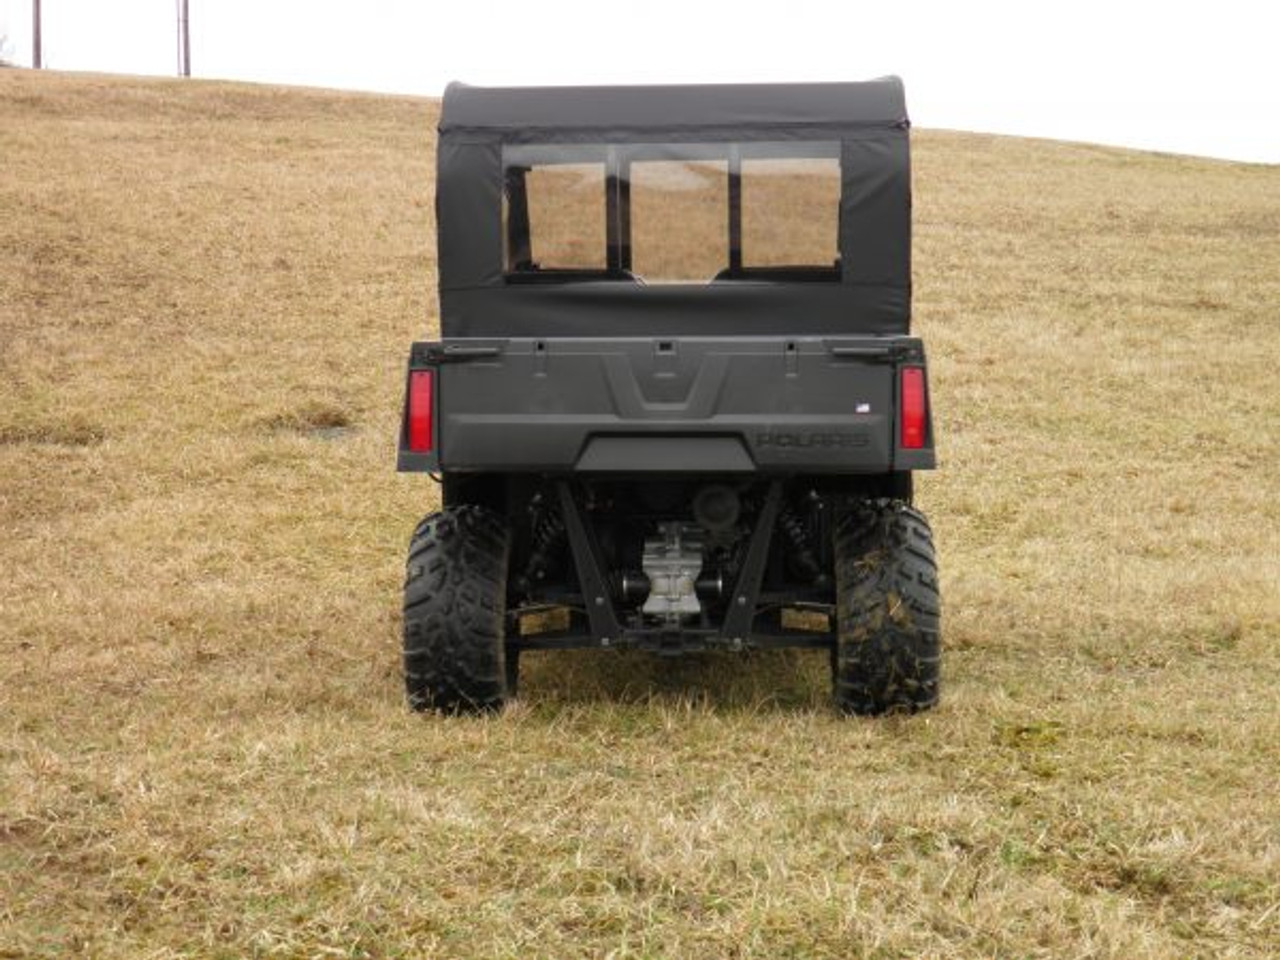 3 Star side x side Polaris Ranger Mid-Size Crew 500/570 doors and rear window rear view